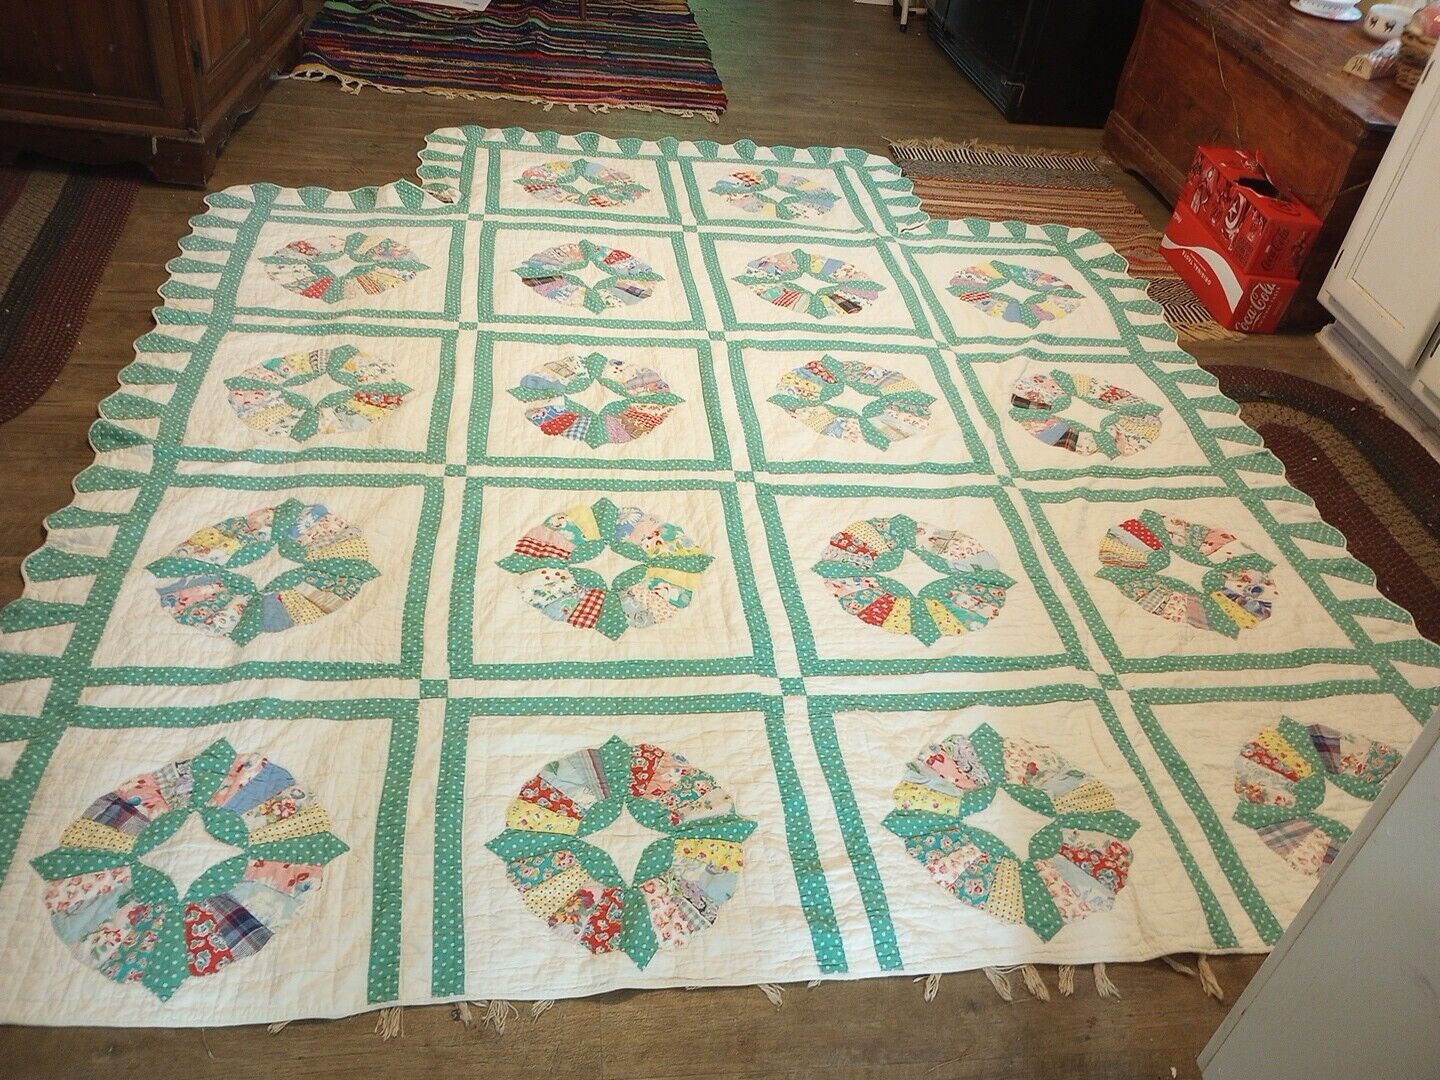 VINTAGE 1940\'S HANDMADE FLOUR/FEED SACK QUILT DRESDEN PLATE 80 x 74 - Awesome